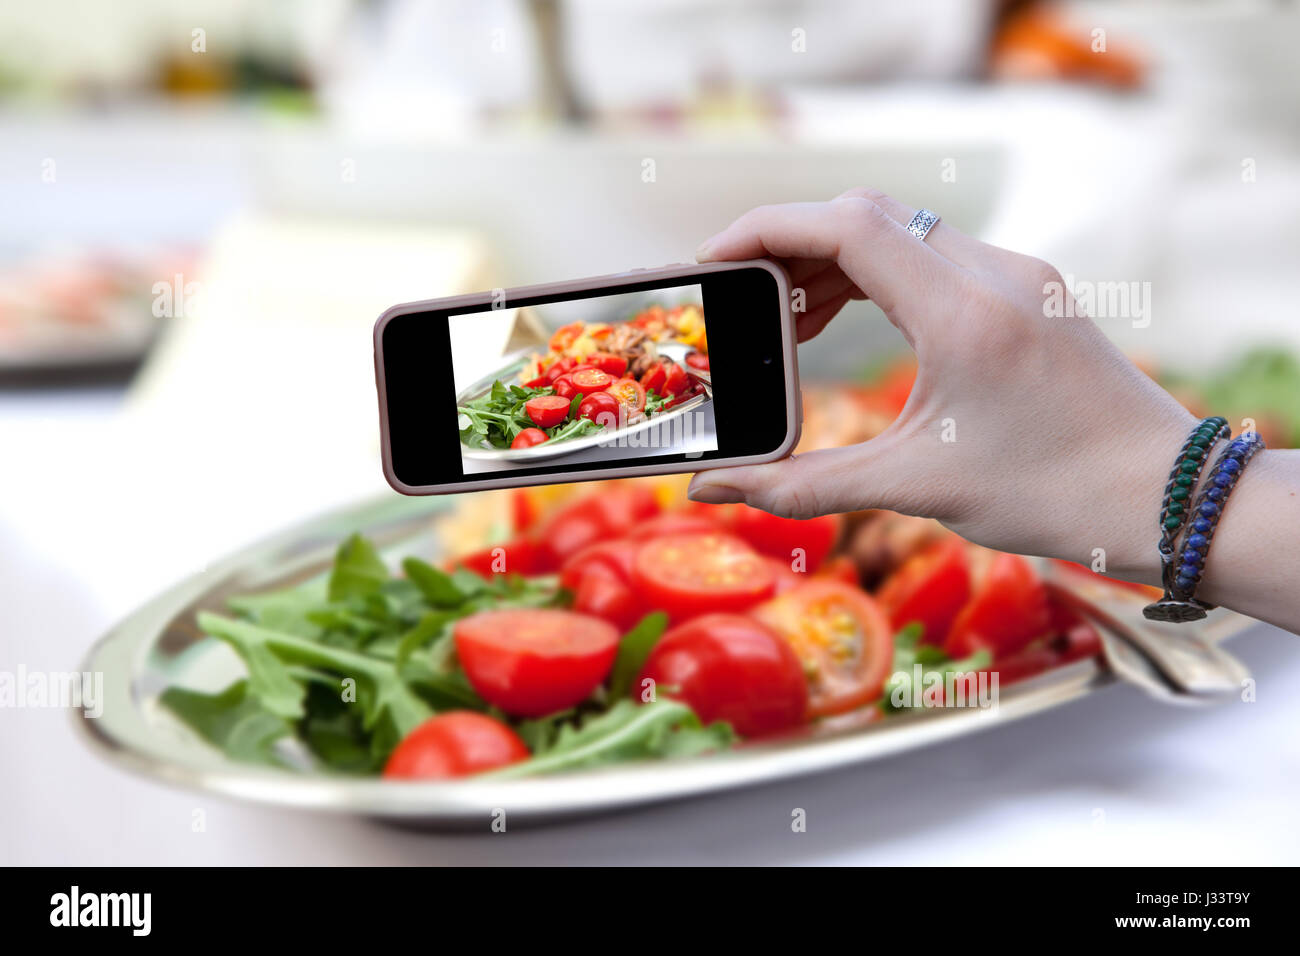 Woman holding a phone and photographed salad of red tomato Stock Photo